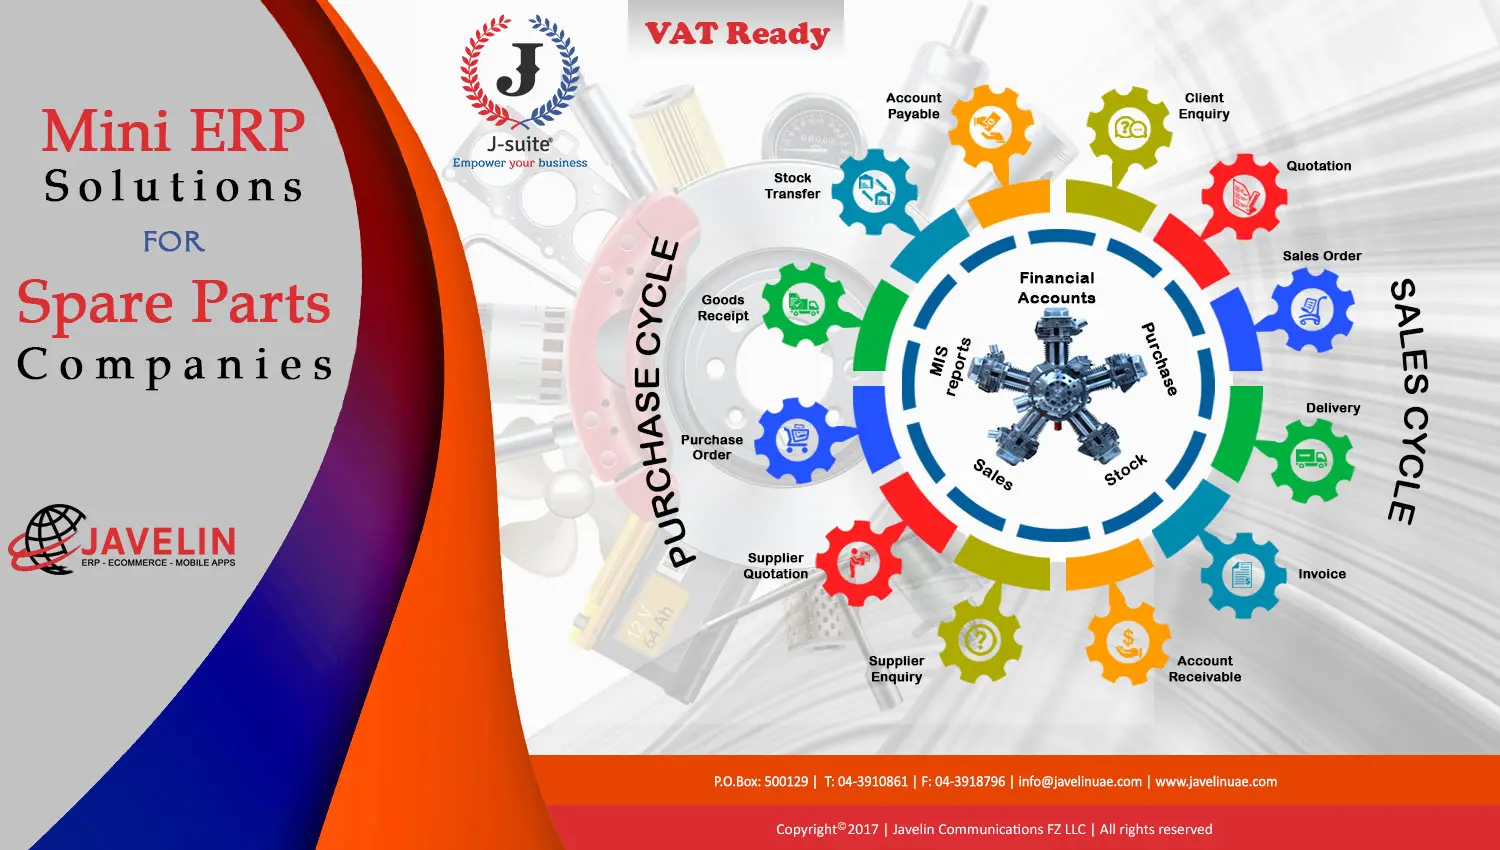 VAT Ready ERP Solutions for Spare Parts Companies